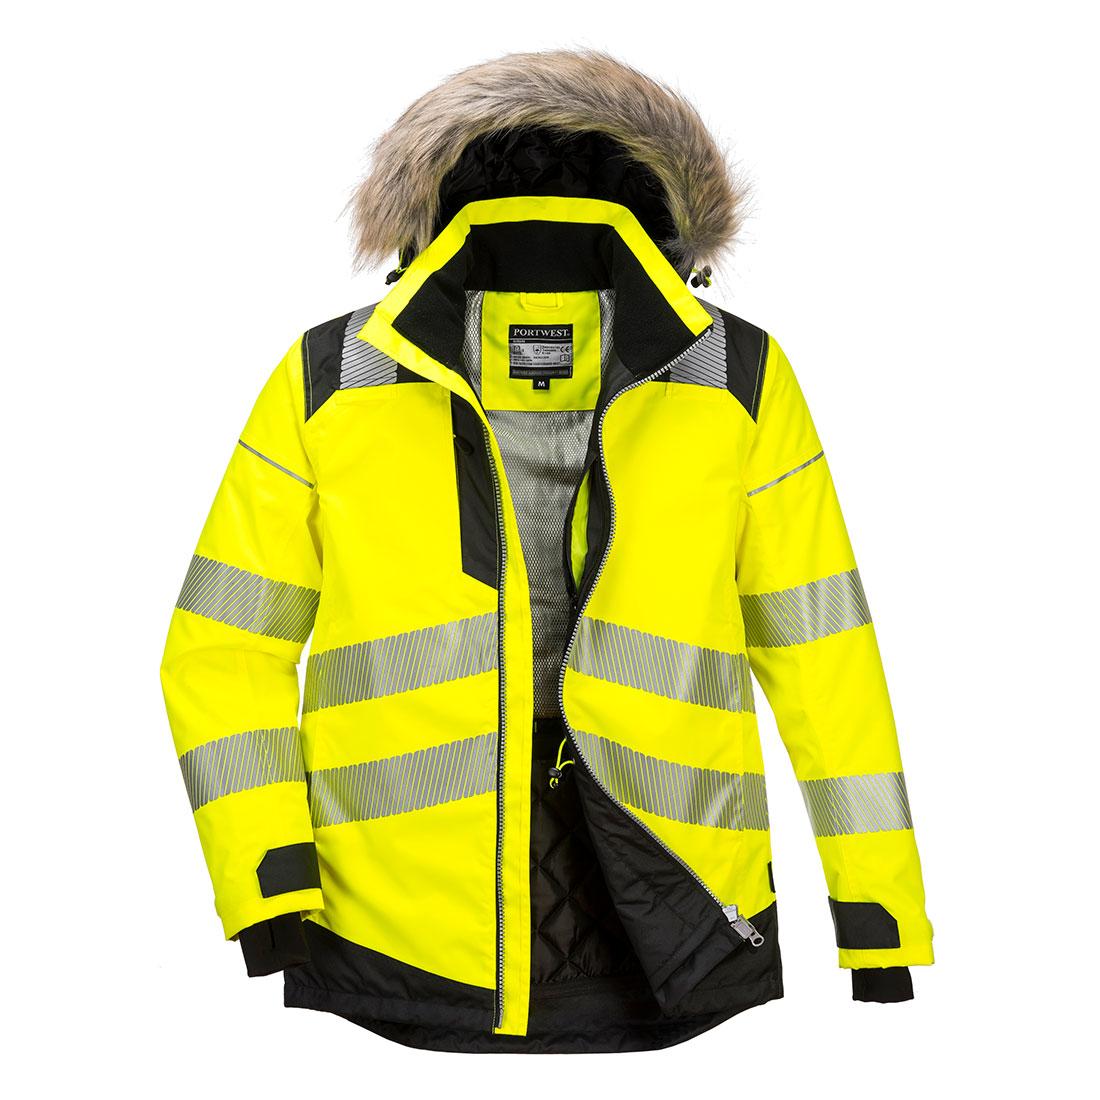 Portwest PW3 Hi-Vis Winter Parka Jacket in Yellow (Product Code: PW369)